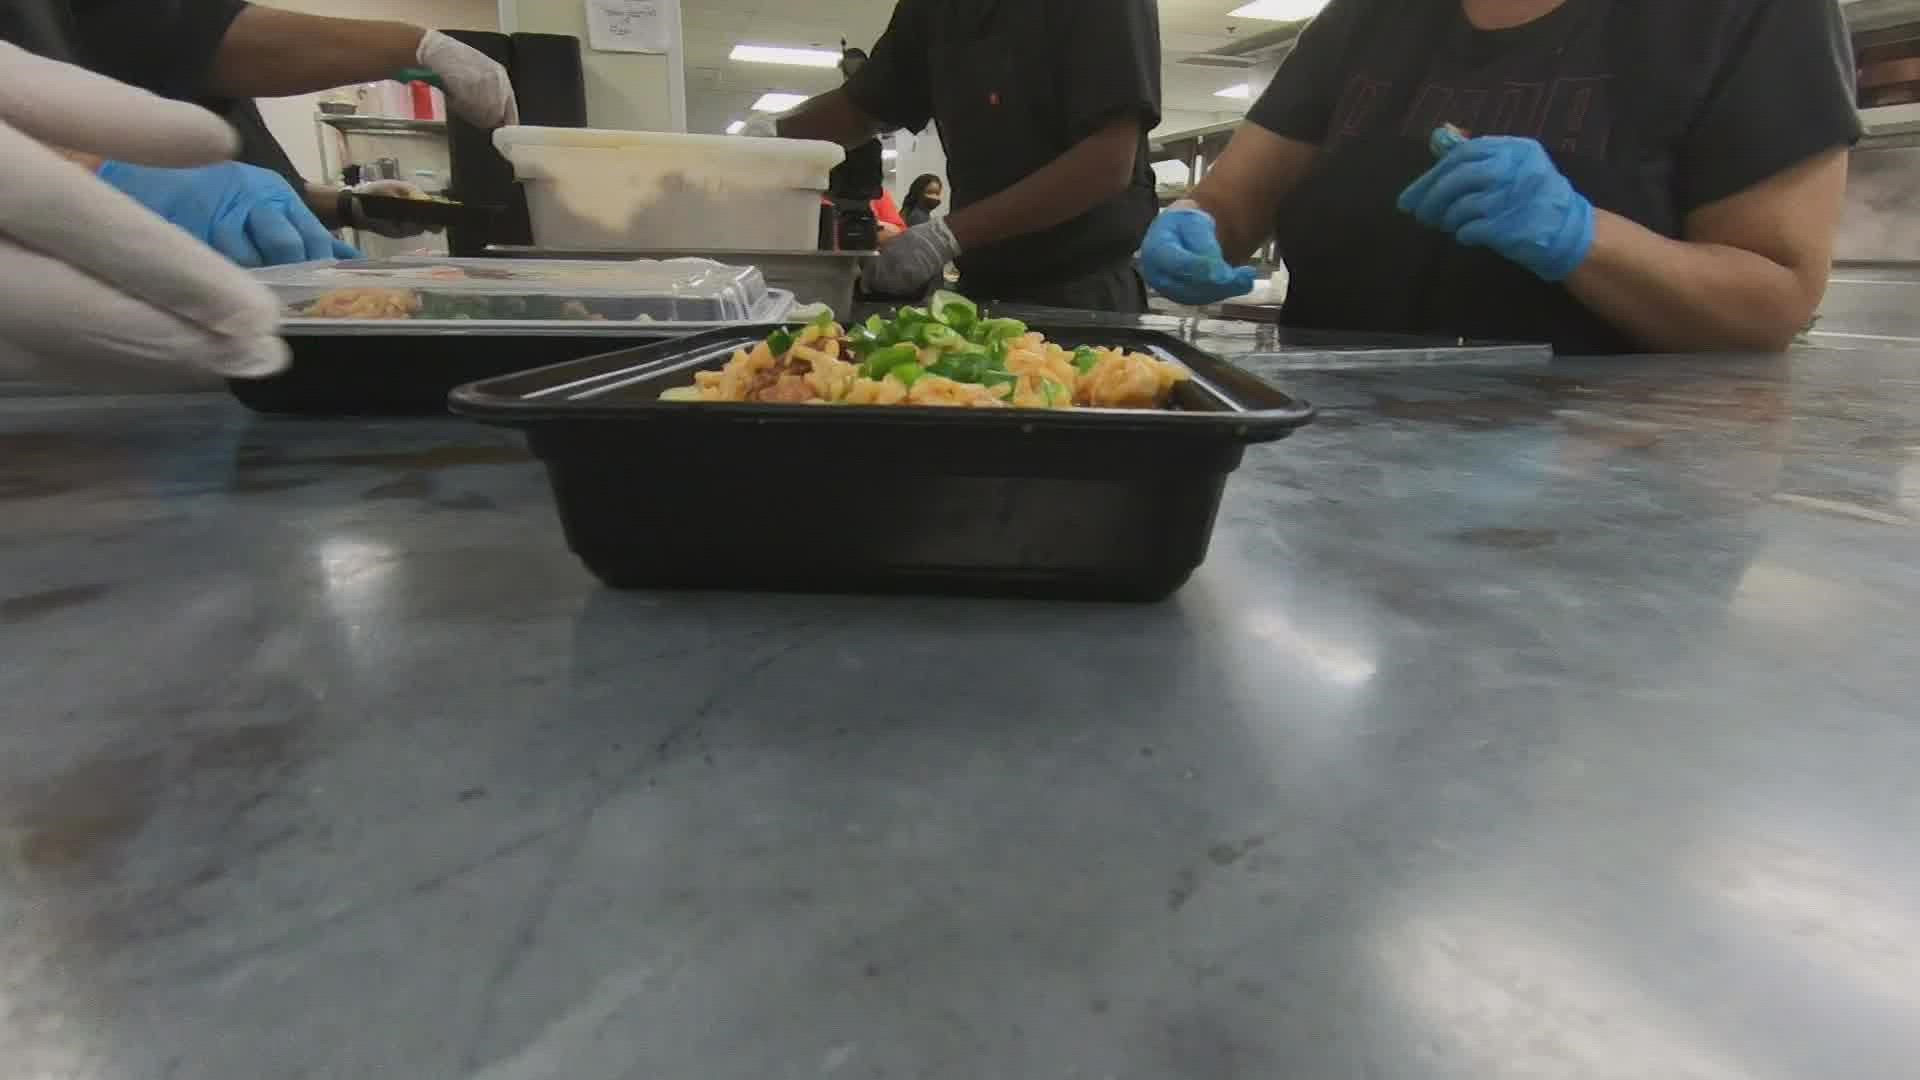 The non-profit organization spent two days preparing, cooking and packaging jambalaya that includes shrimp, chicken and andouille sausage.